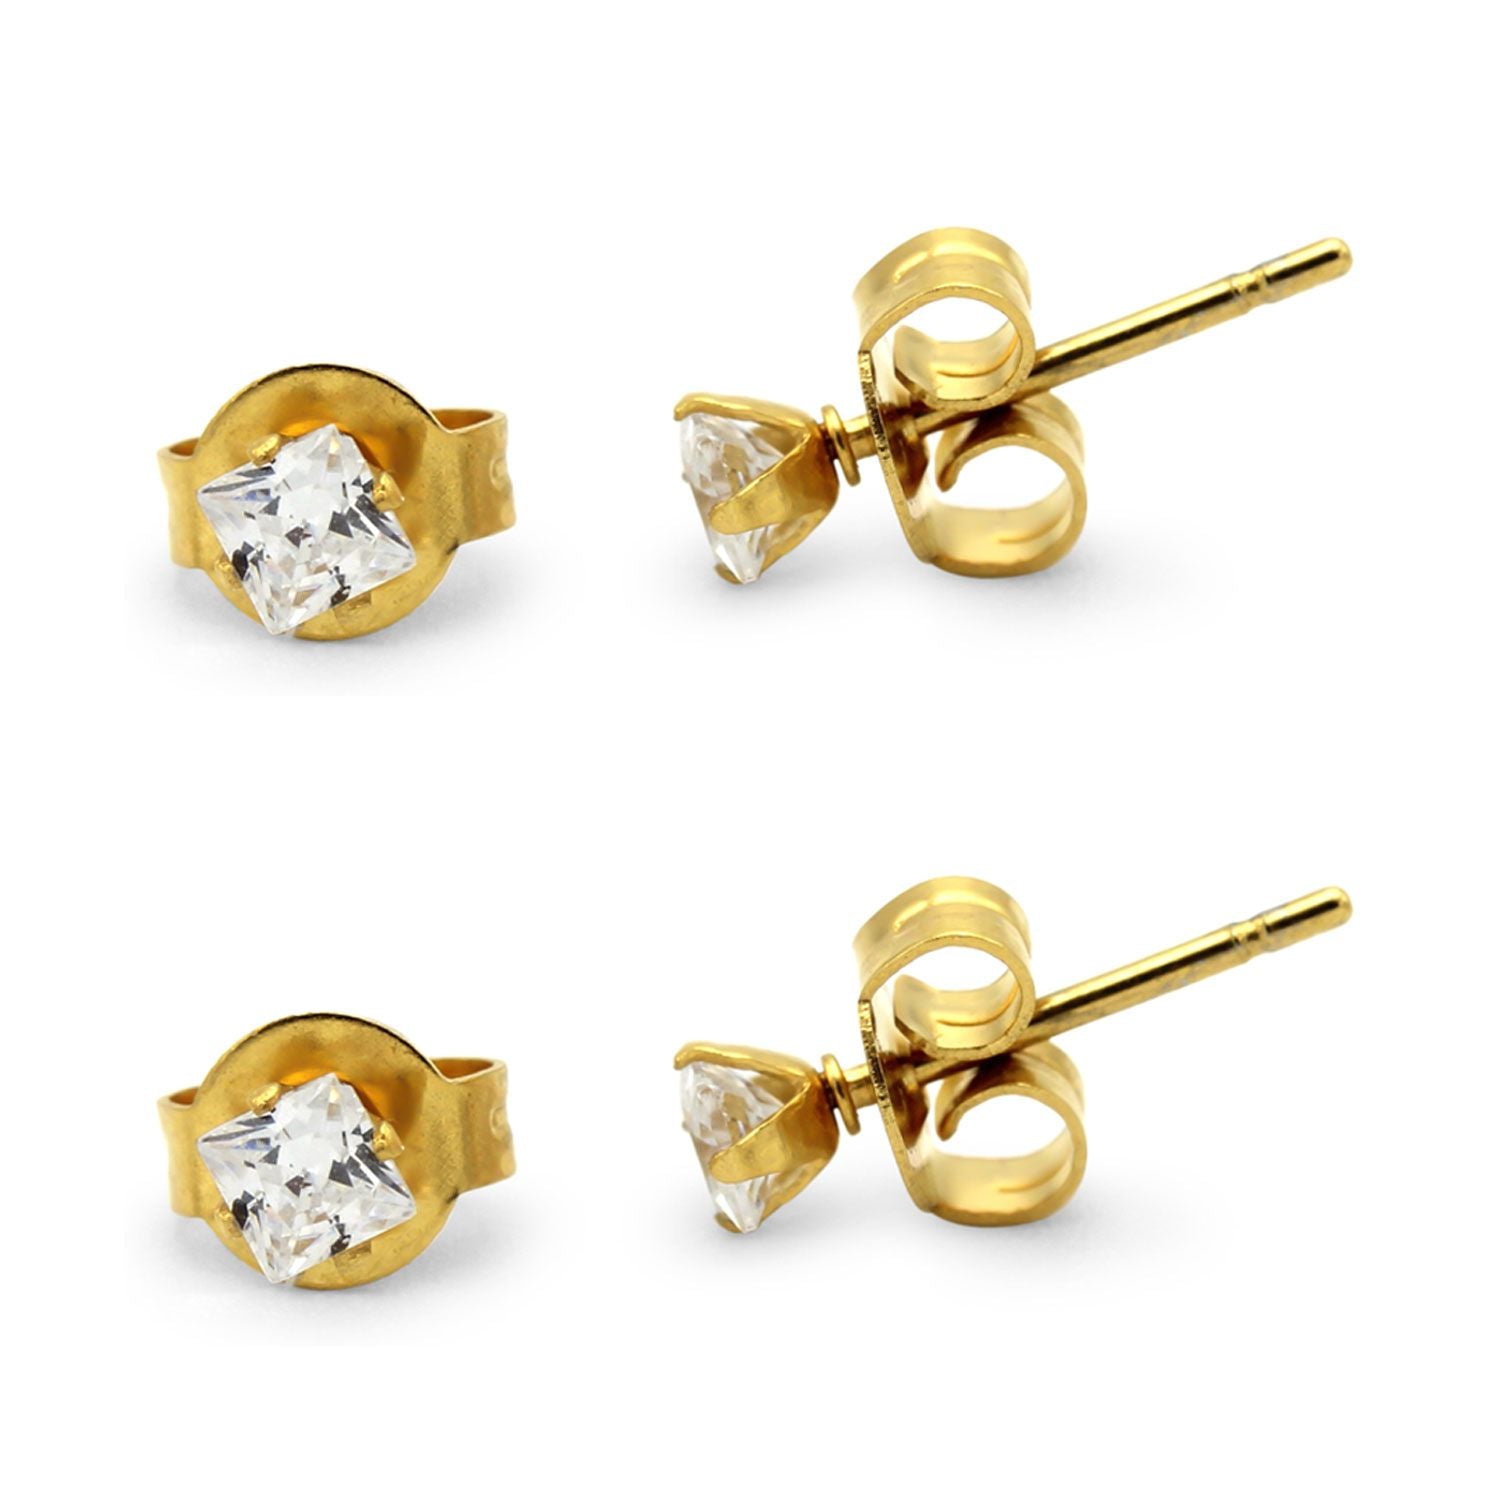 Cubic Zirconia Square 14K Gold Plated Stud Earrings Set Of 2 Stainless Steel Jewelry Men Women